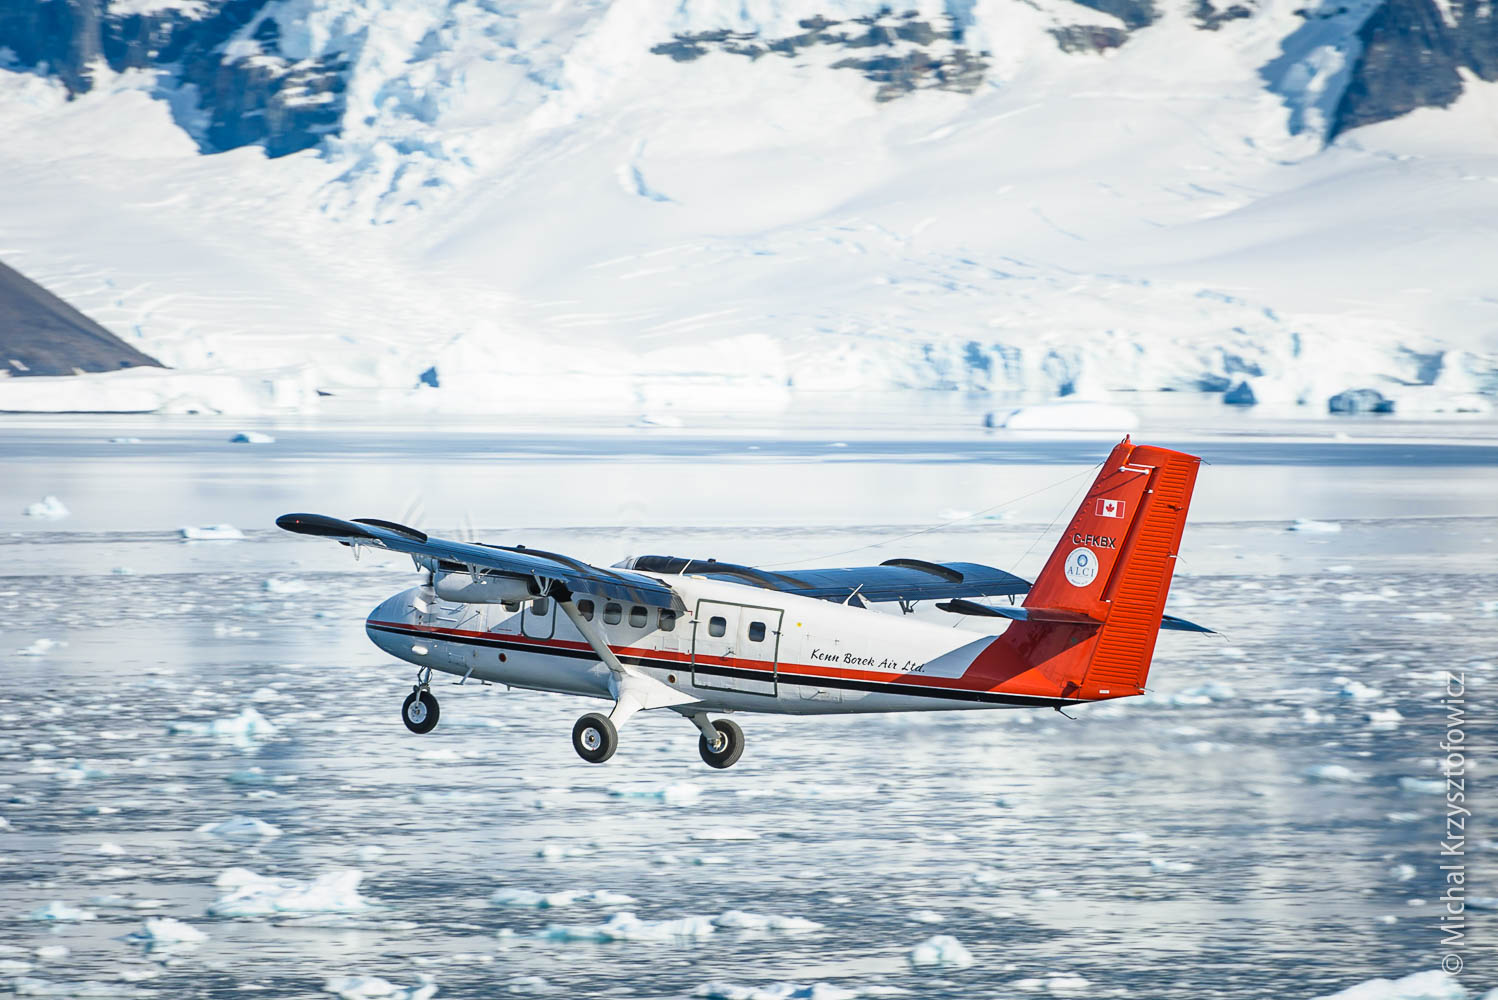 Kenn Borek Twin Otter after take off from Rothera